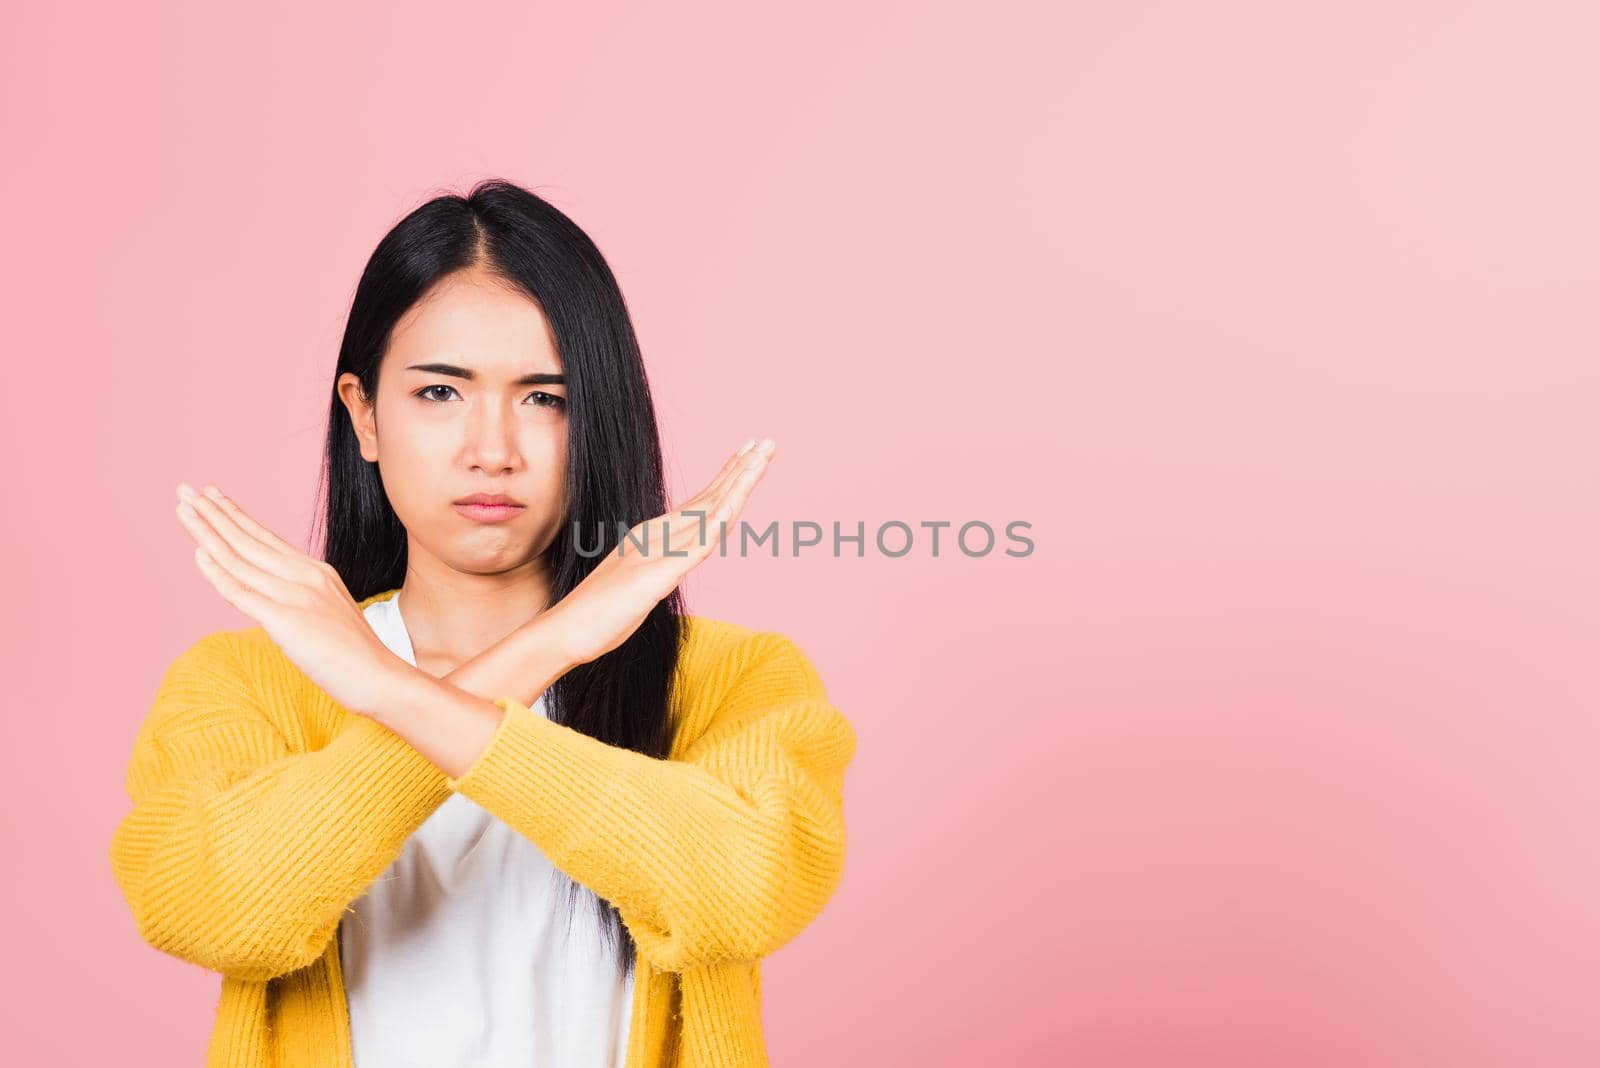 Portrait Asian beautiful young woman unhappy or confident standing wear holding two cross arms say no X sign, studio shot isolated pink background, Thai female pose reject gesture with copy space